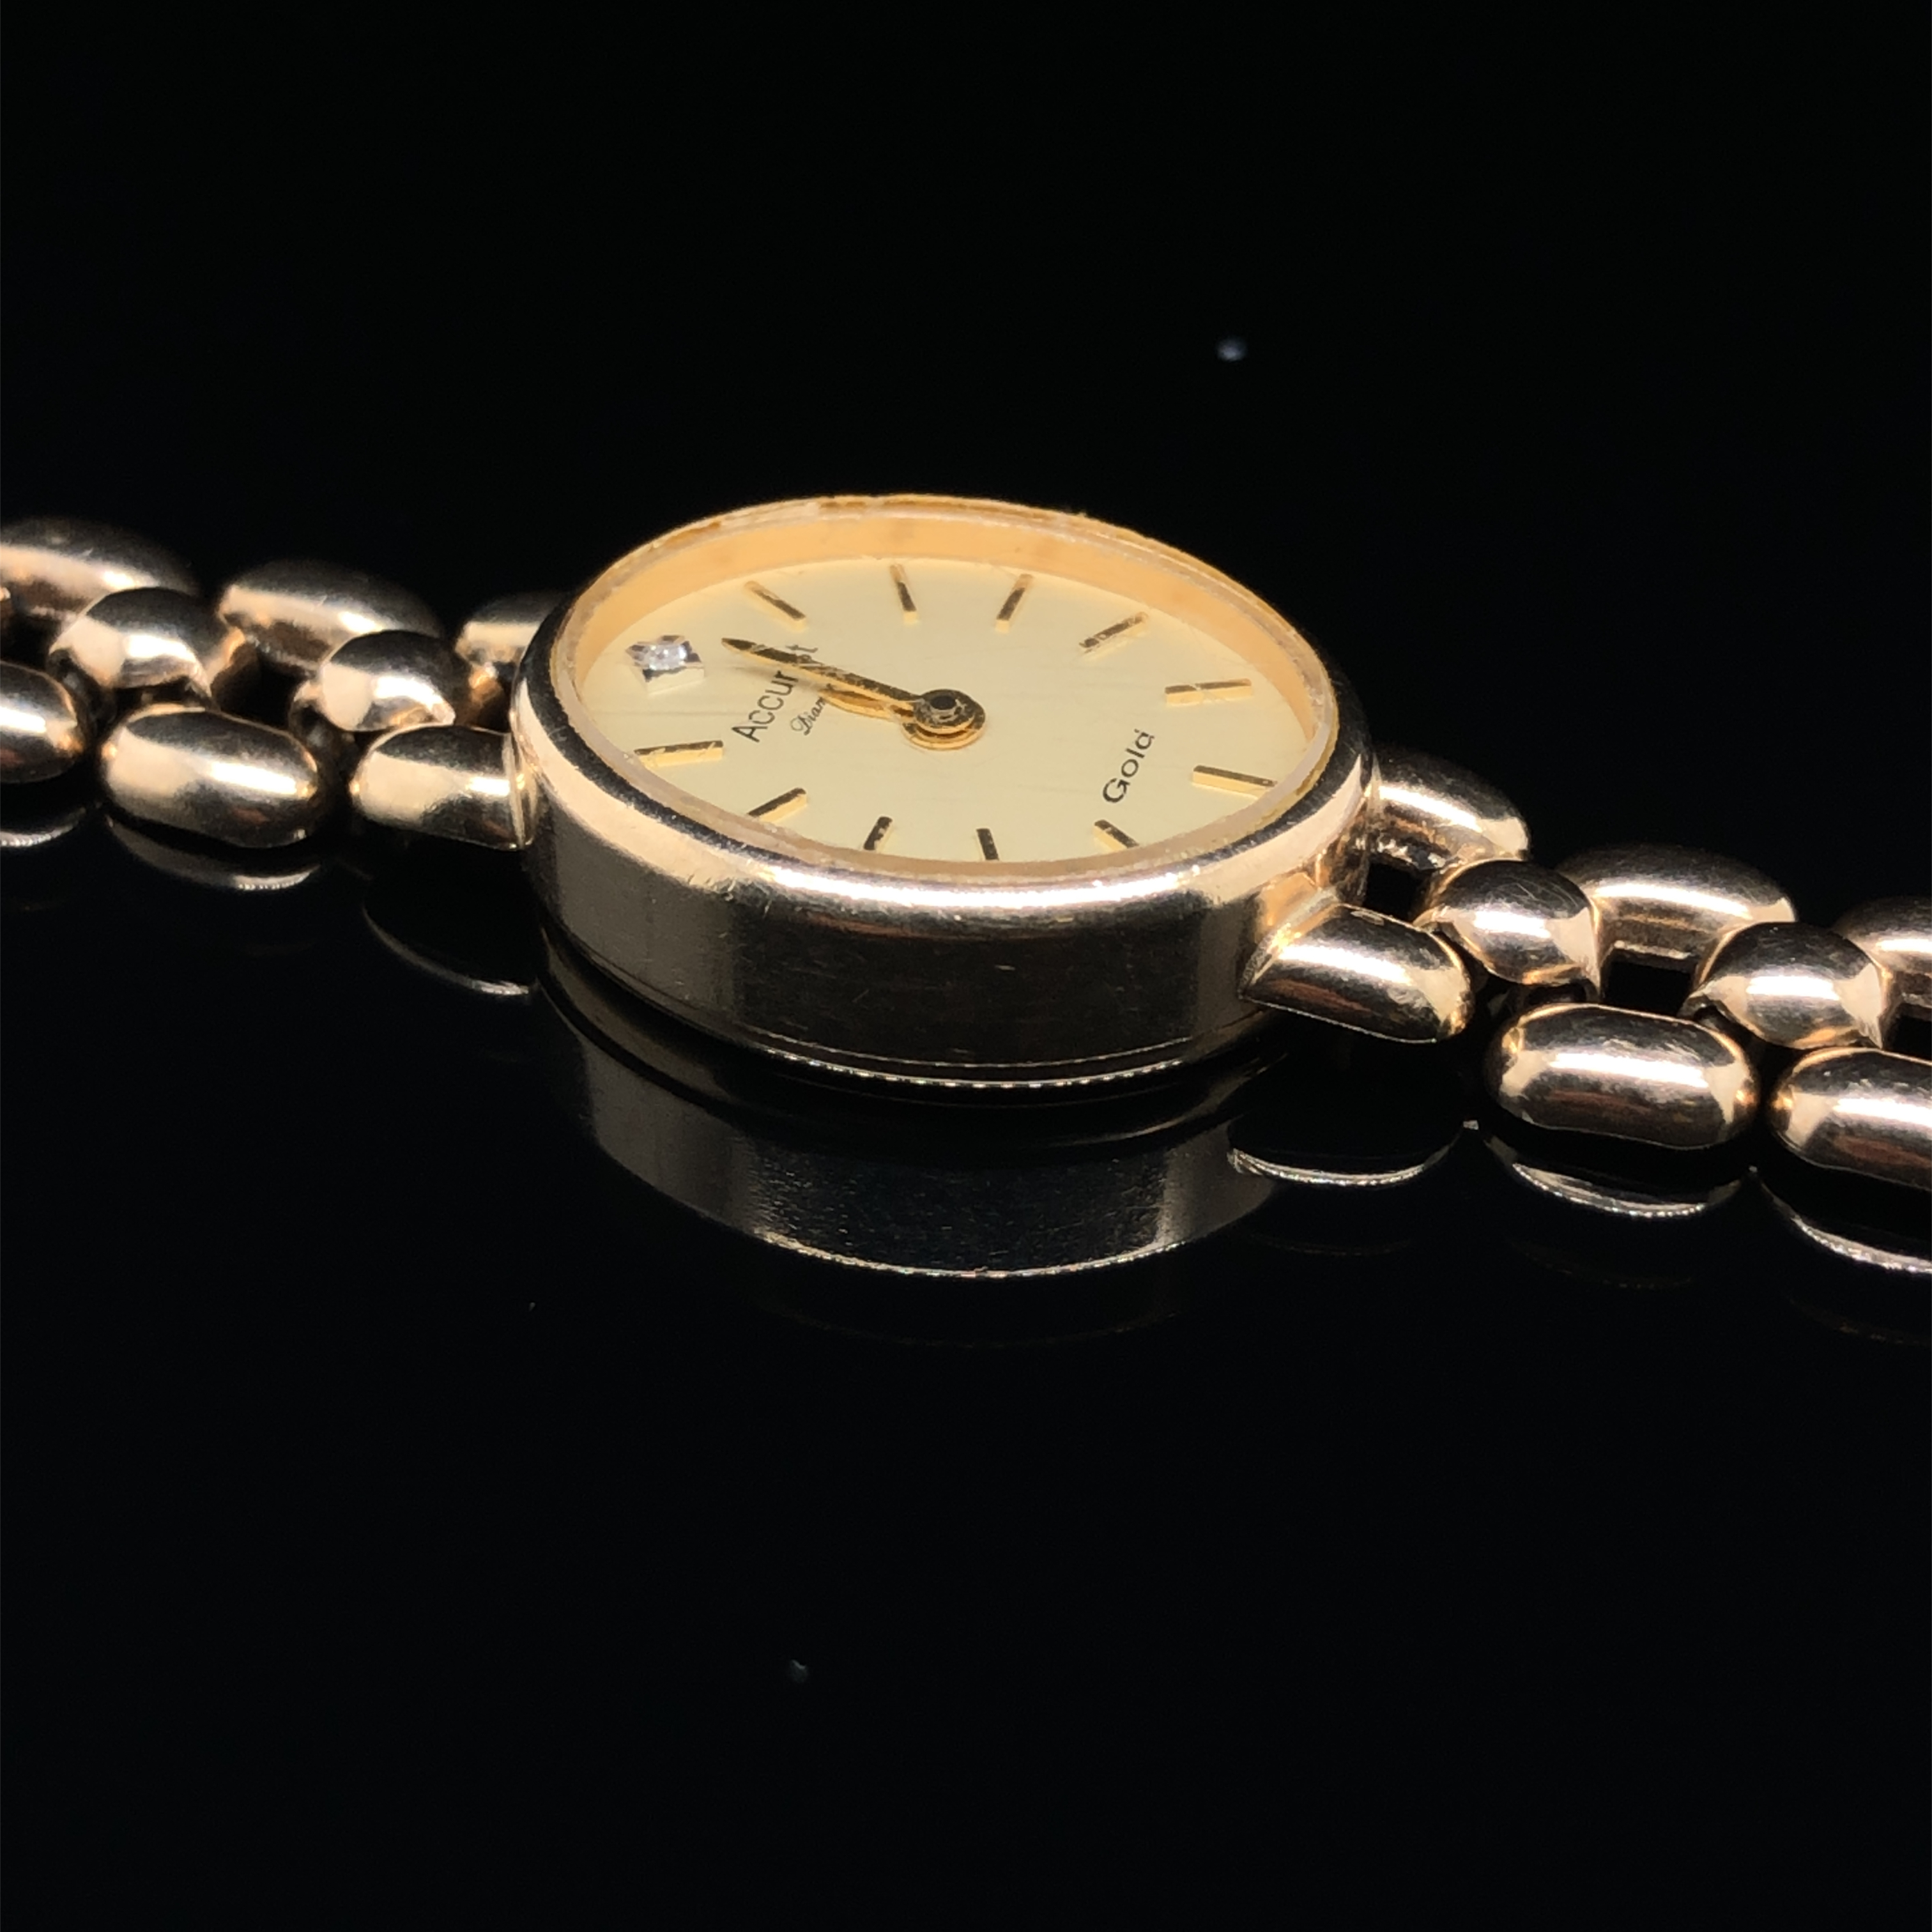 A 9ct HALLMARKED GOLD ACCURIST LADIES WRIST WATCH. GROSS WEIGHT 18.89grms. - Image 4 of 4